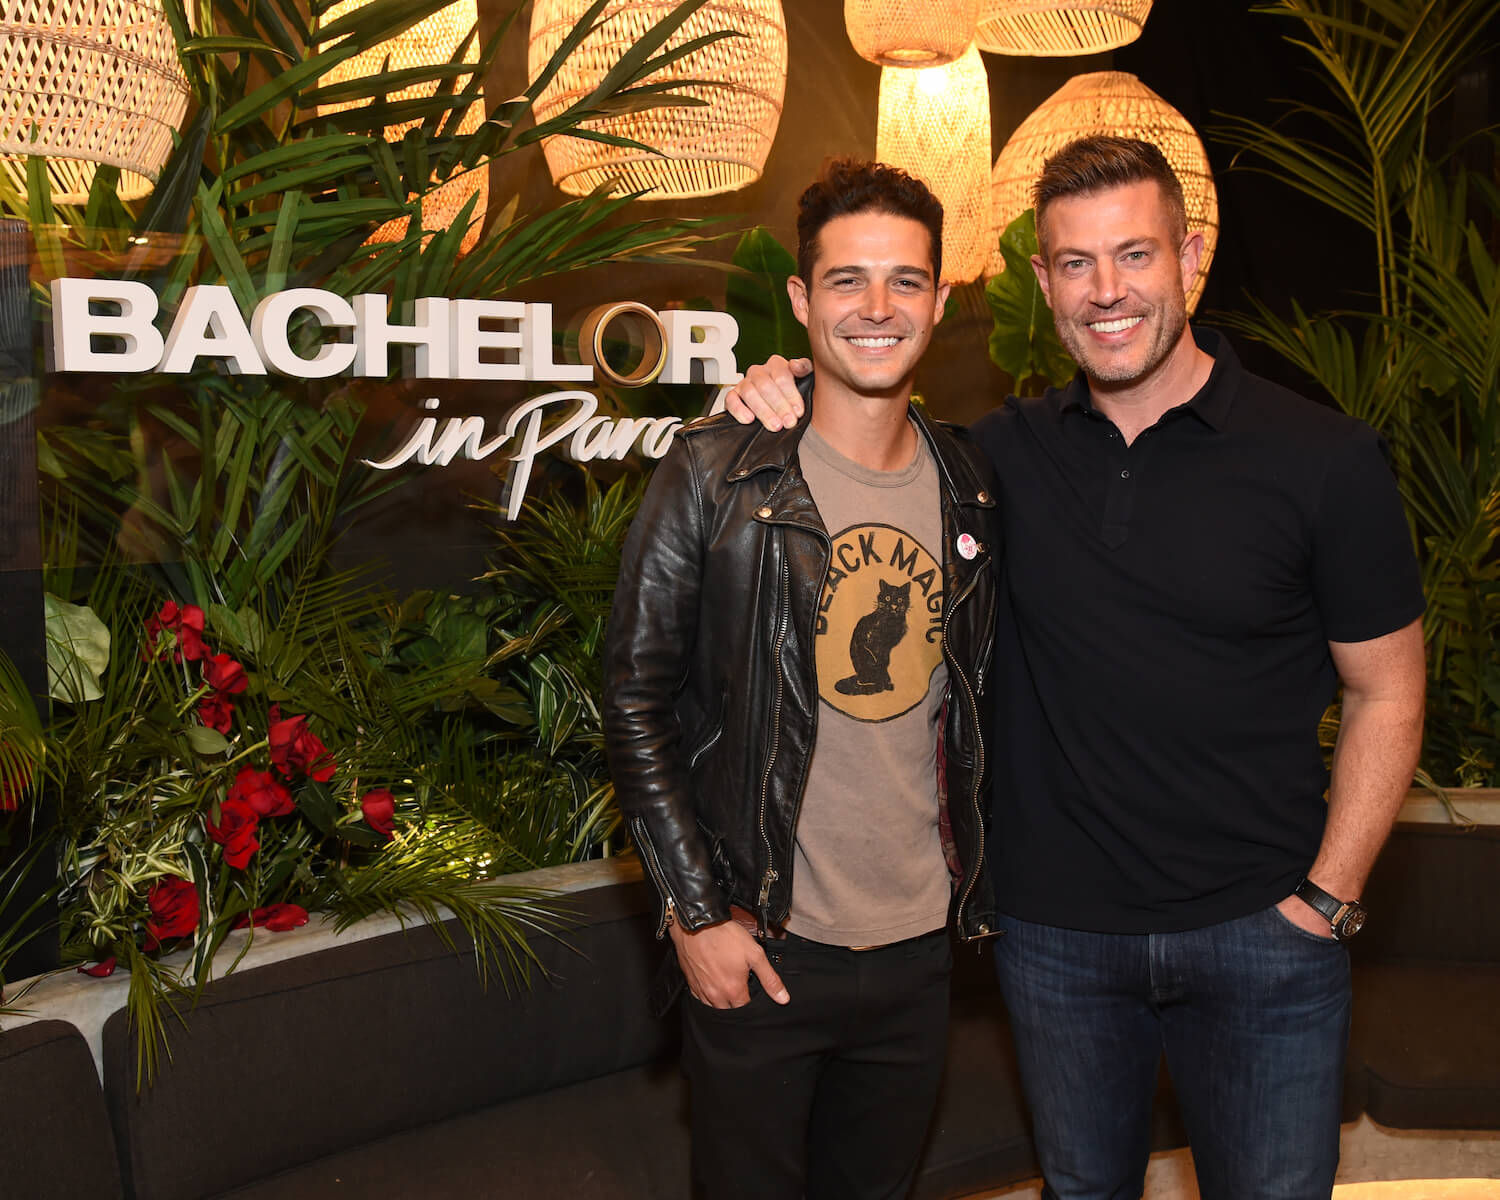 Jesse Palmer, the host of 'Bachelor in Paradise' Season 9, with his arm around Wells Adams in front of a 'Bachelor in Paradise' sign